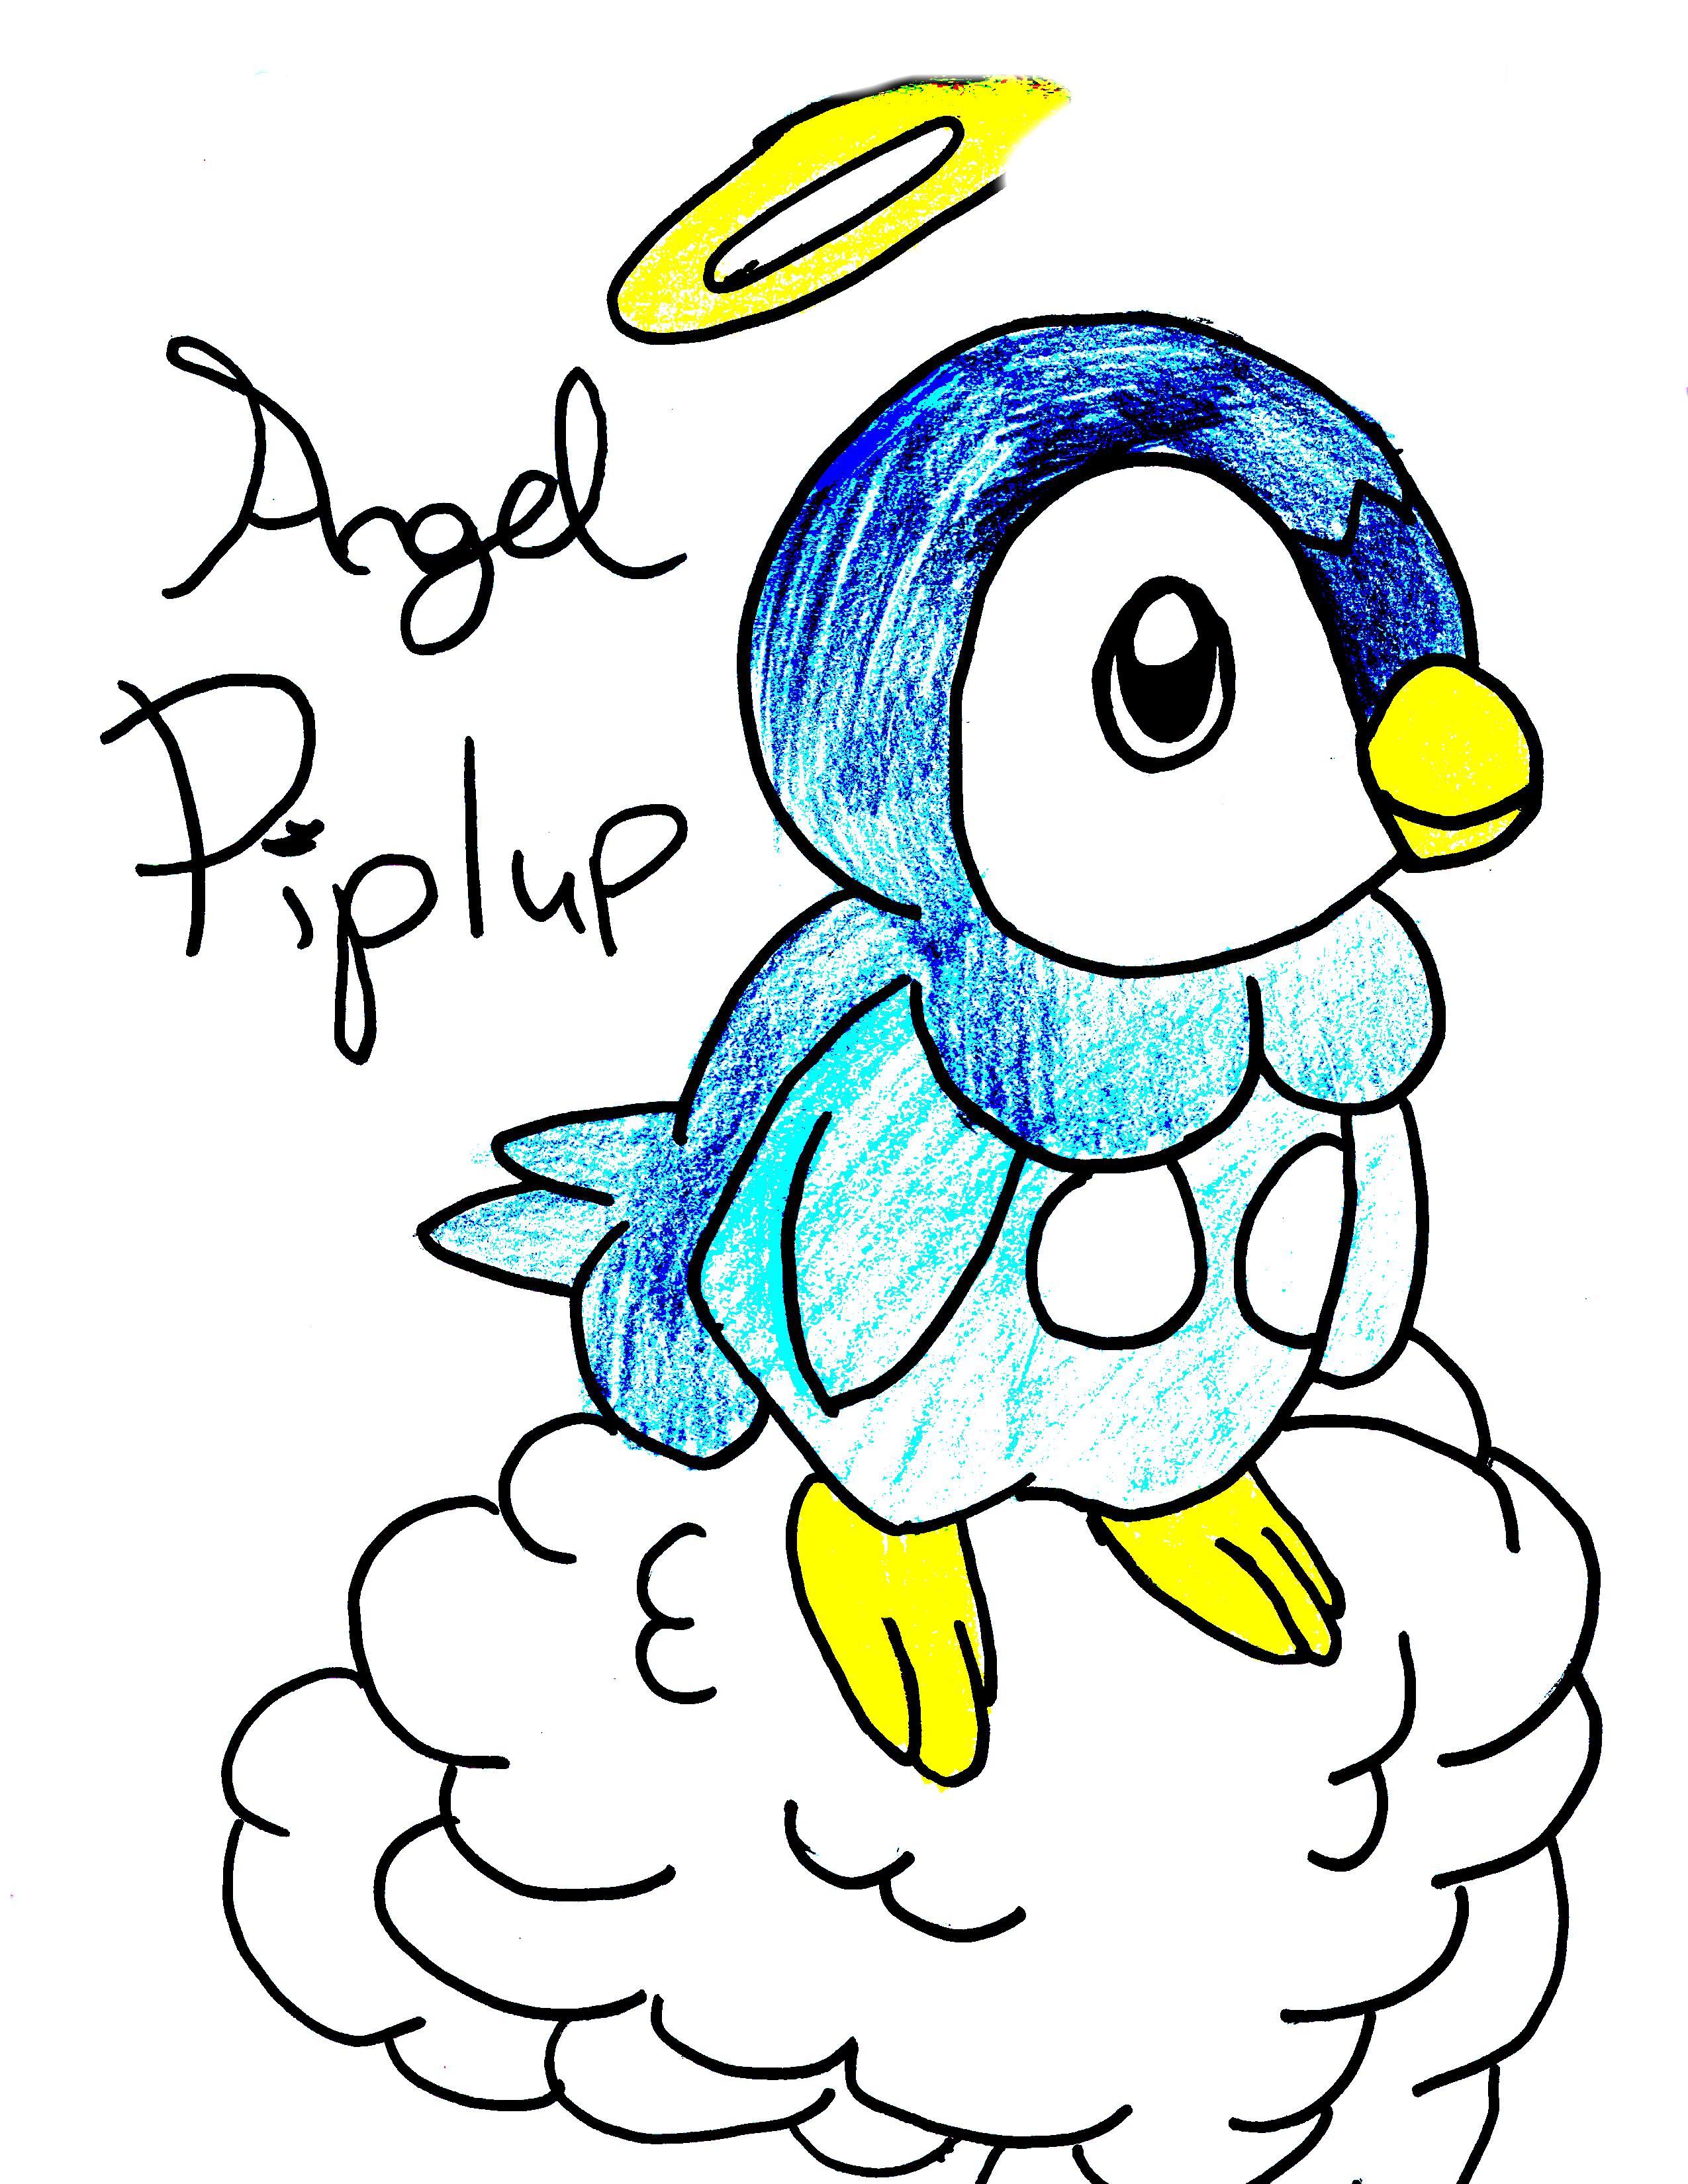 Angel Piplup by Azrob